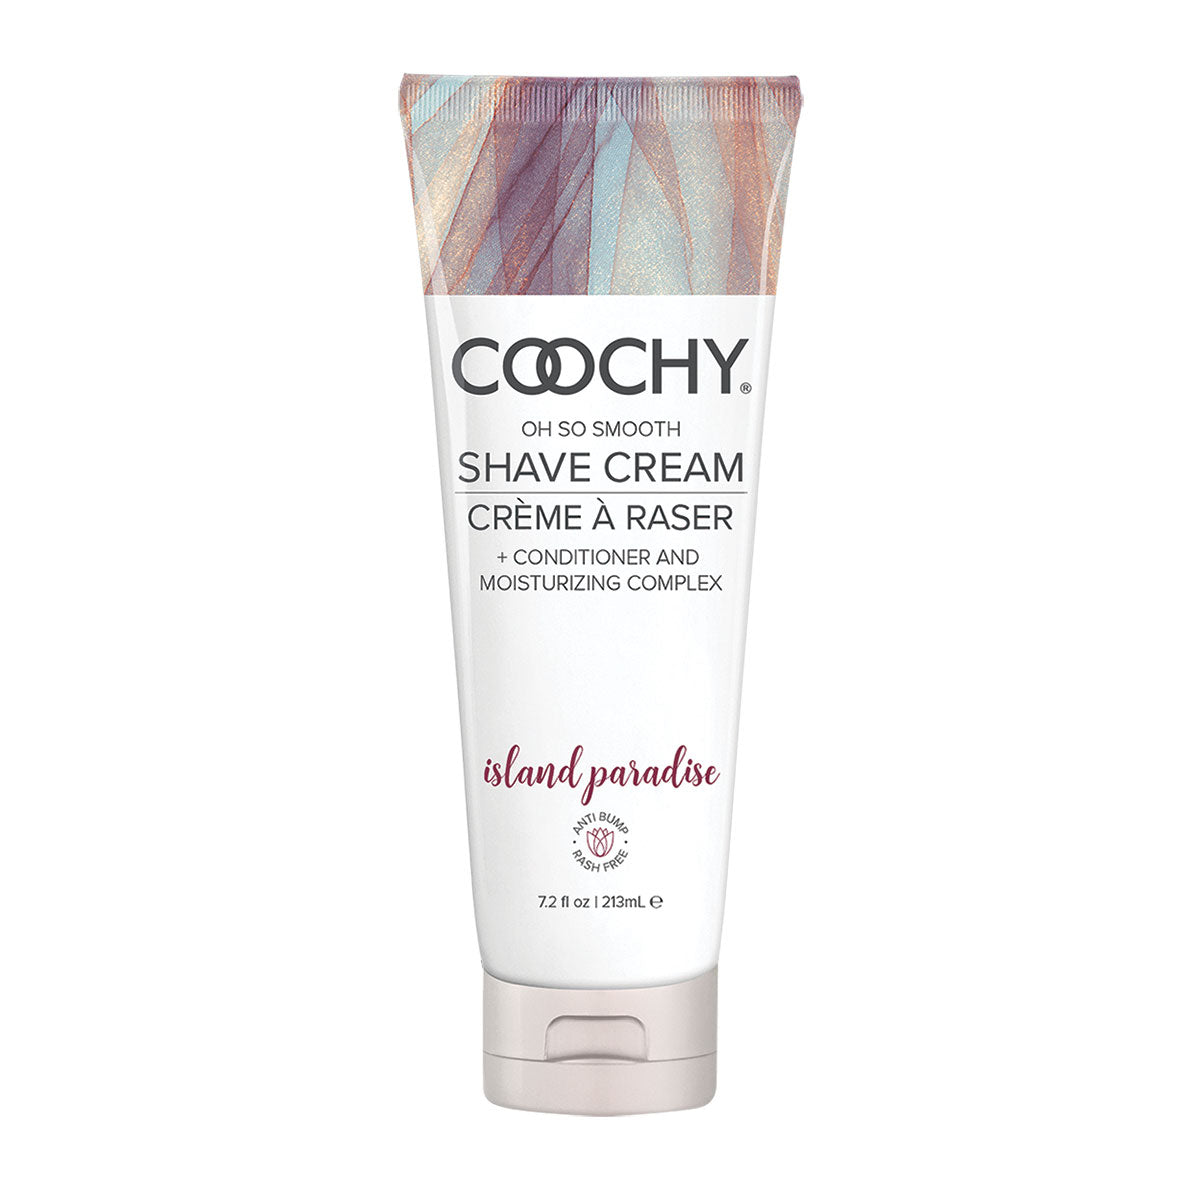 Coochy Shave Cream 7.2oz - Assorted Scents